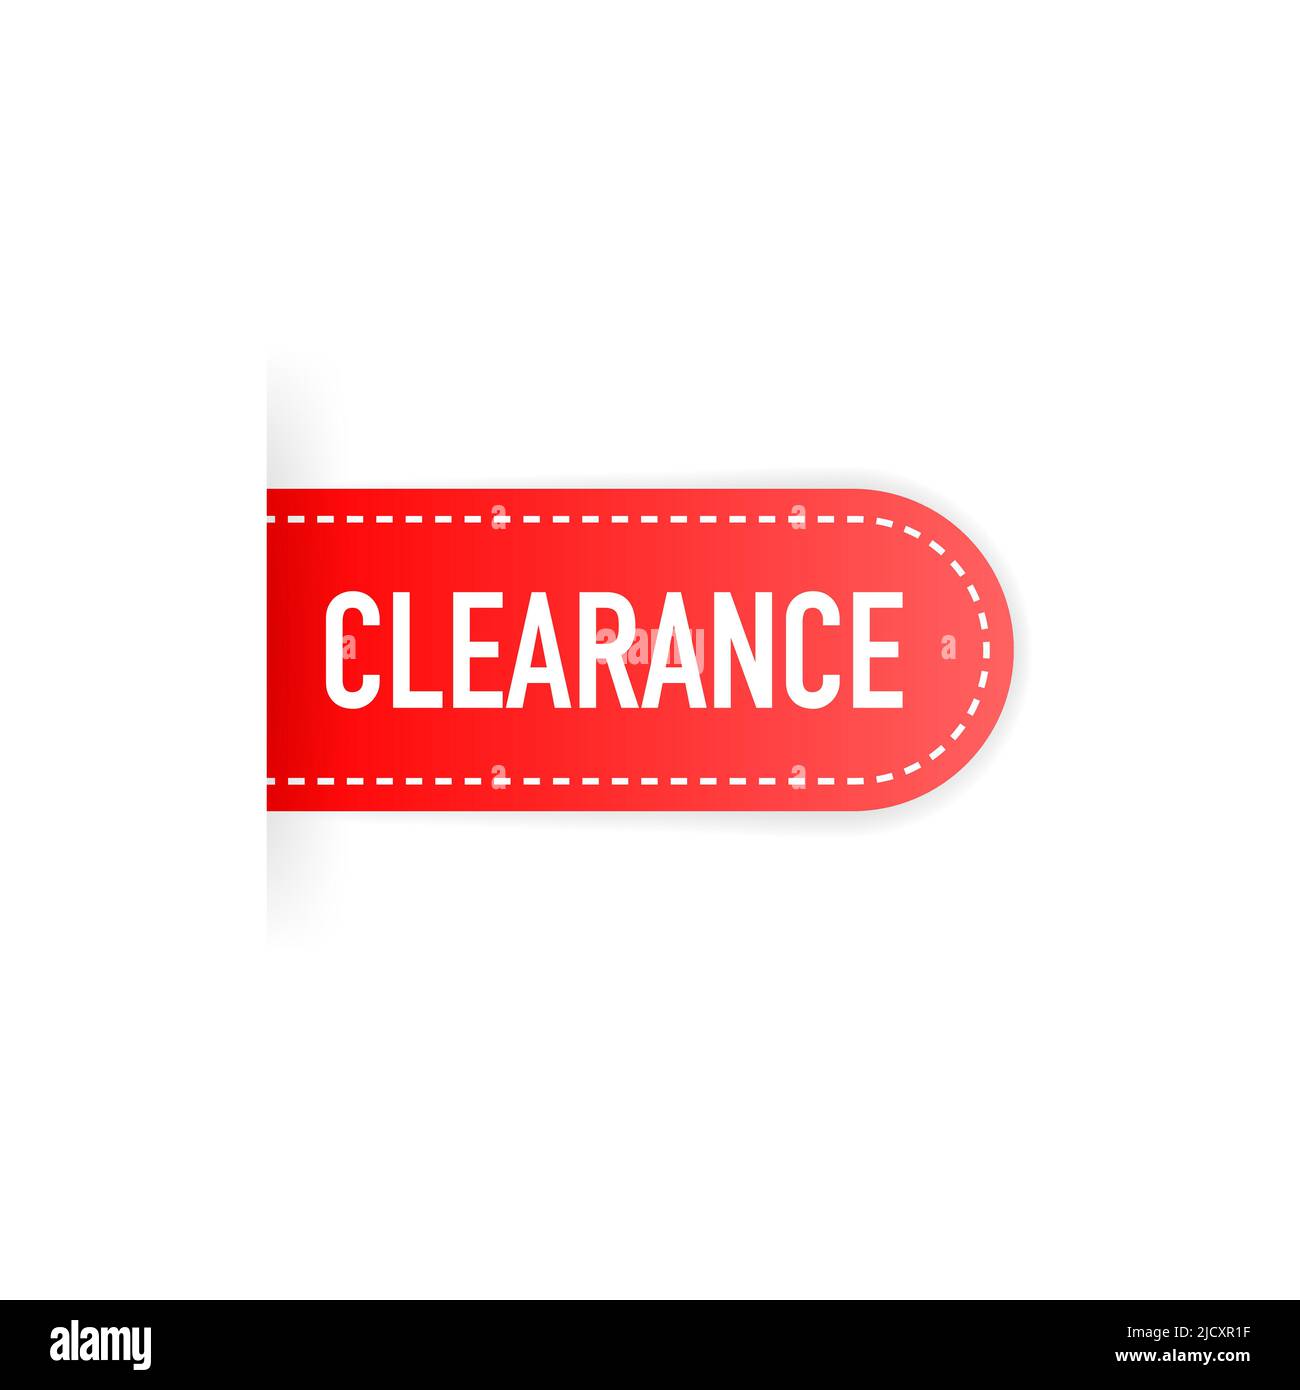 Clearance Sale Red Stamp Text Stock Vector - Illustration of marketing,  element: 47027891